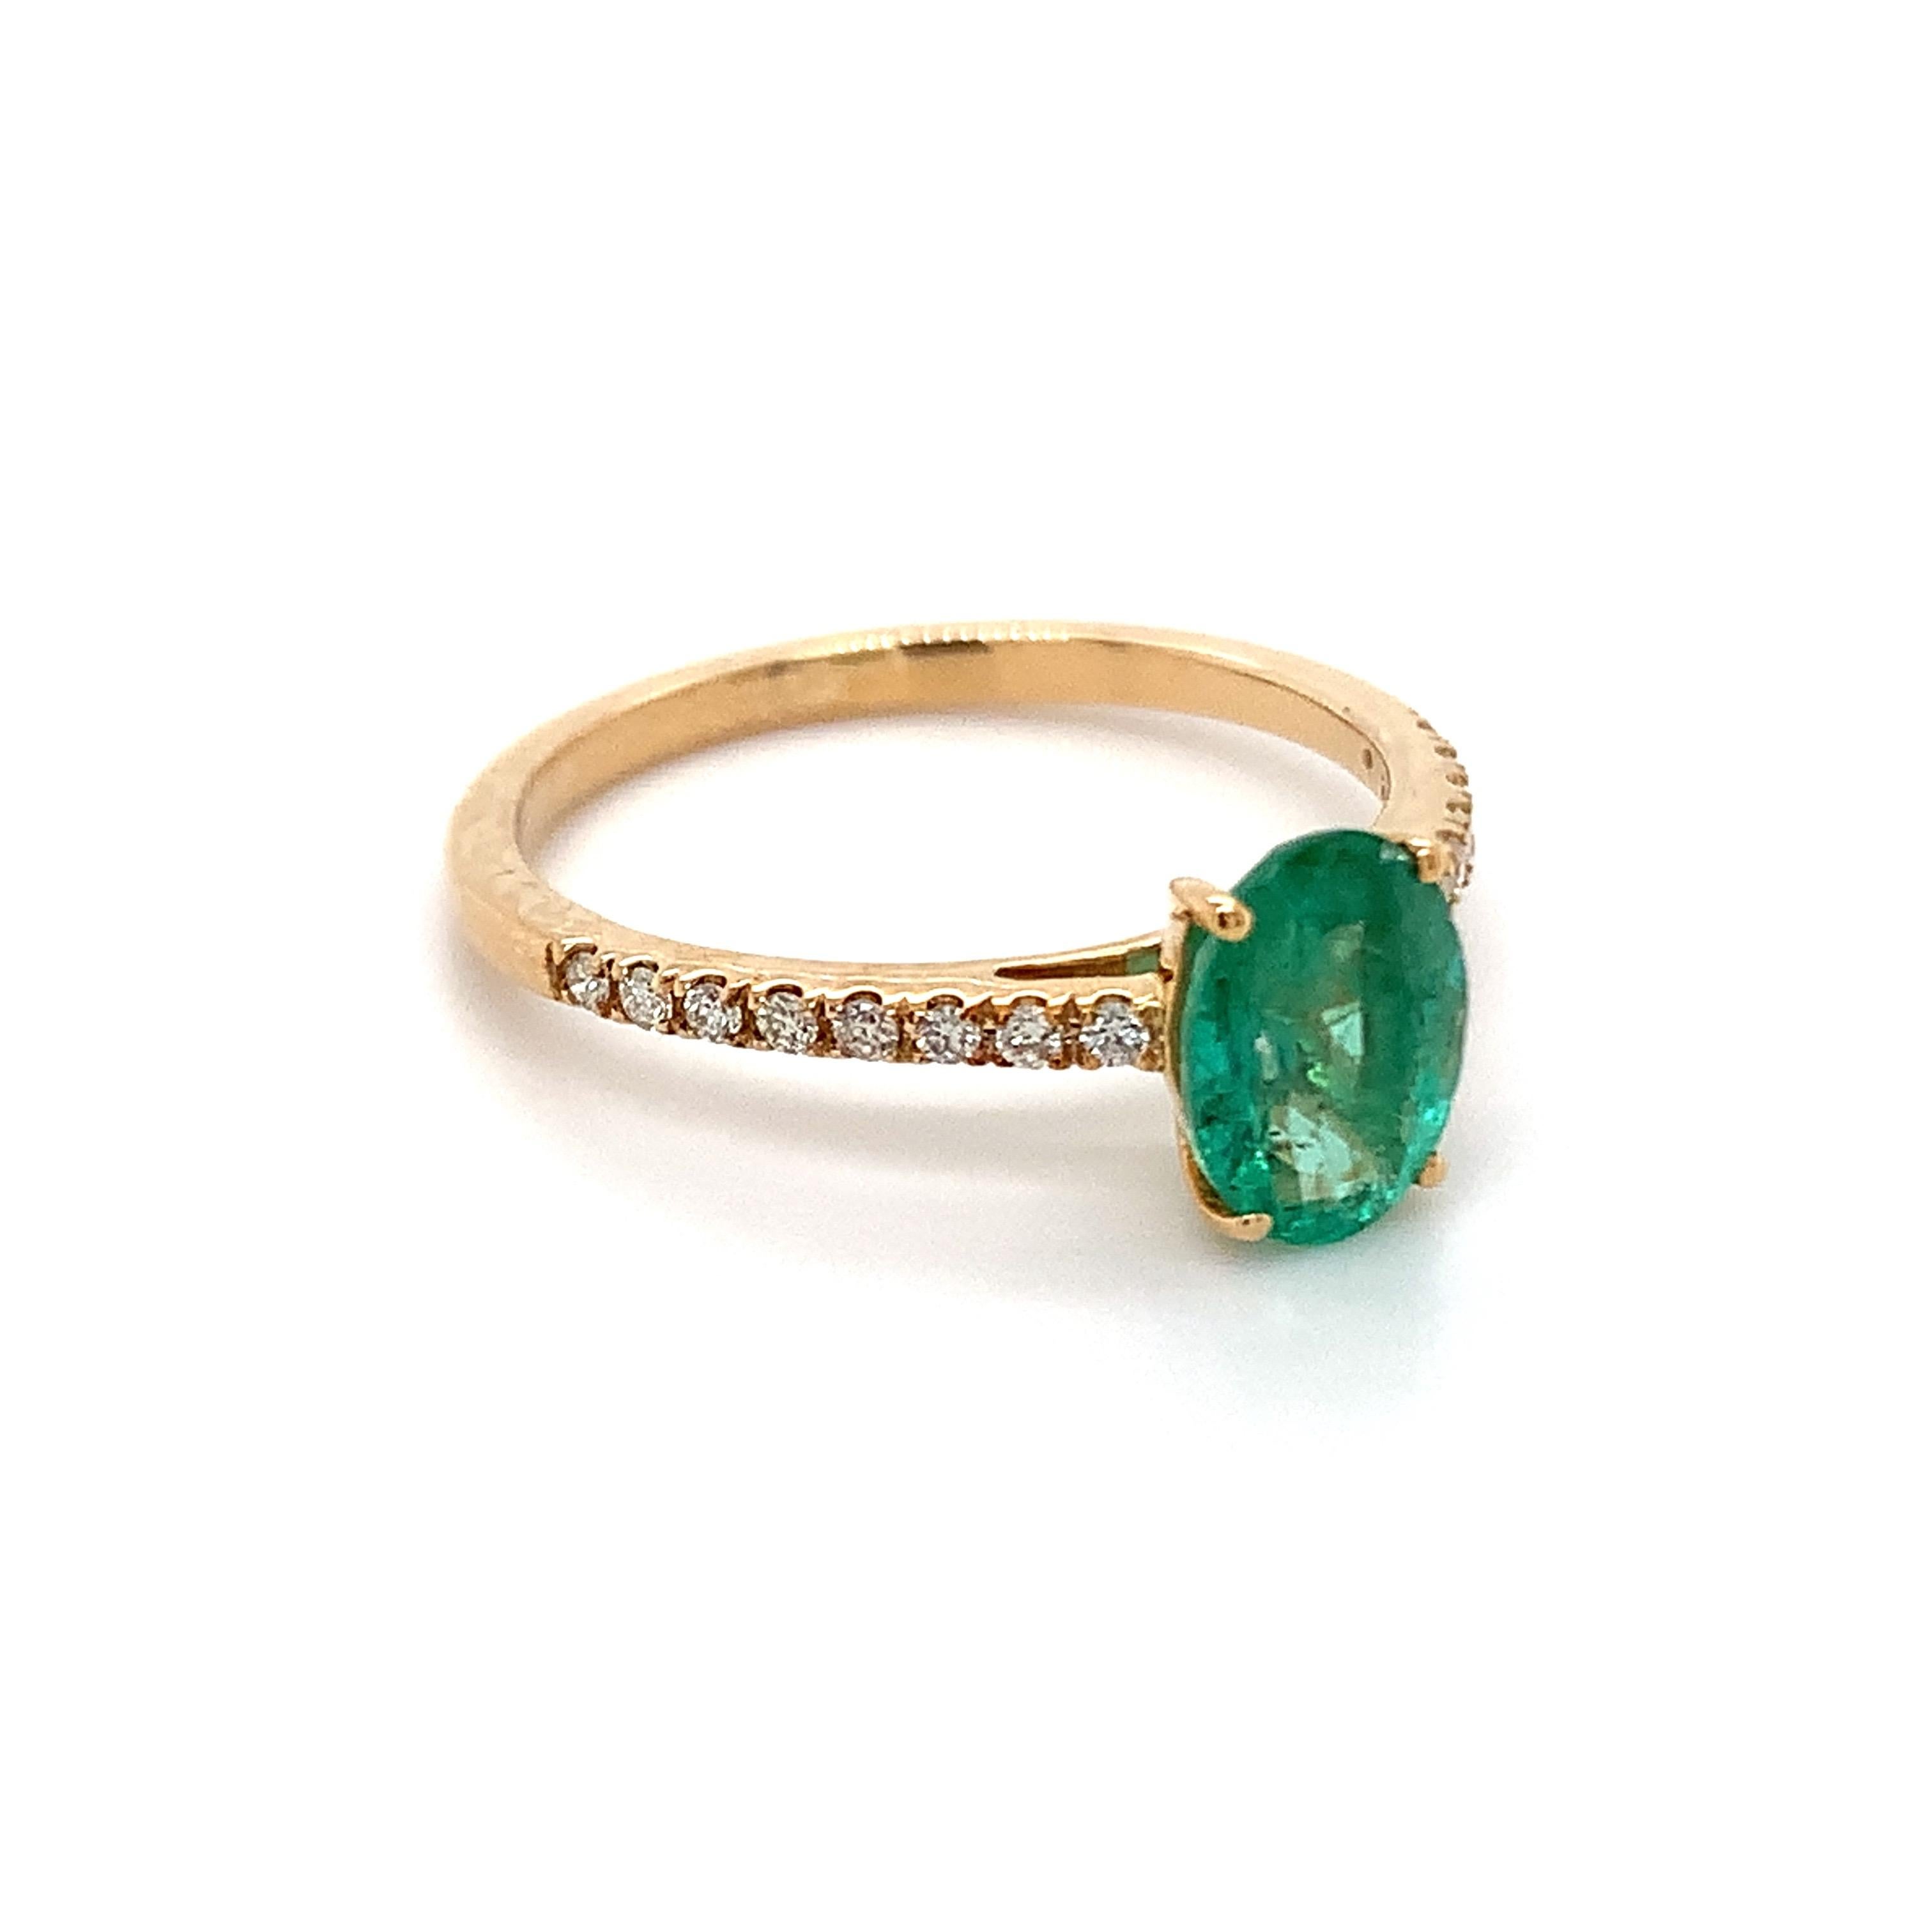 Oval cut emerald gemstone beautifully crafted in a 10K yellow gold ring with natural diamonds.

With a vibrant green color hue. The birthstone for May is a symbol of renewed spring growth. Explore a vast range of precious stone Jewelry in our store.